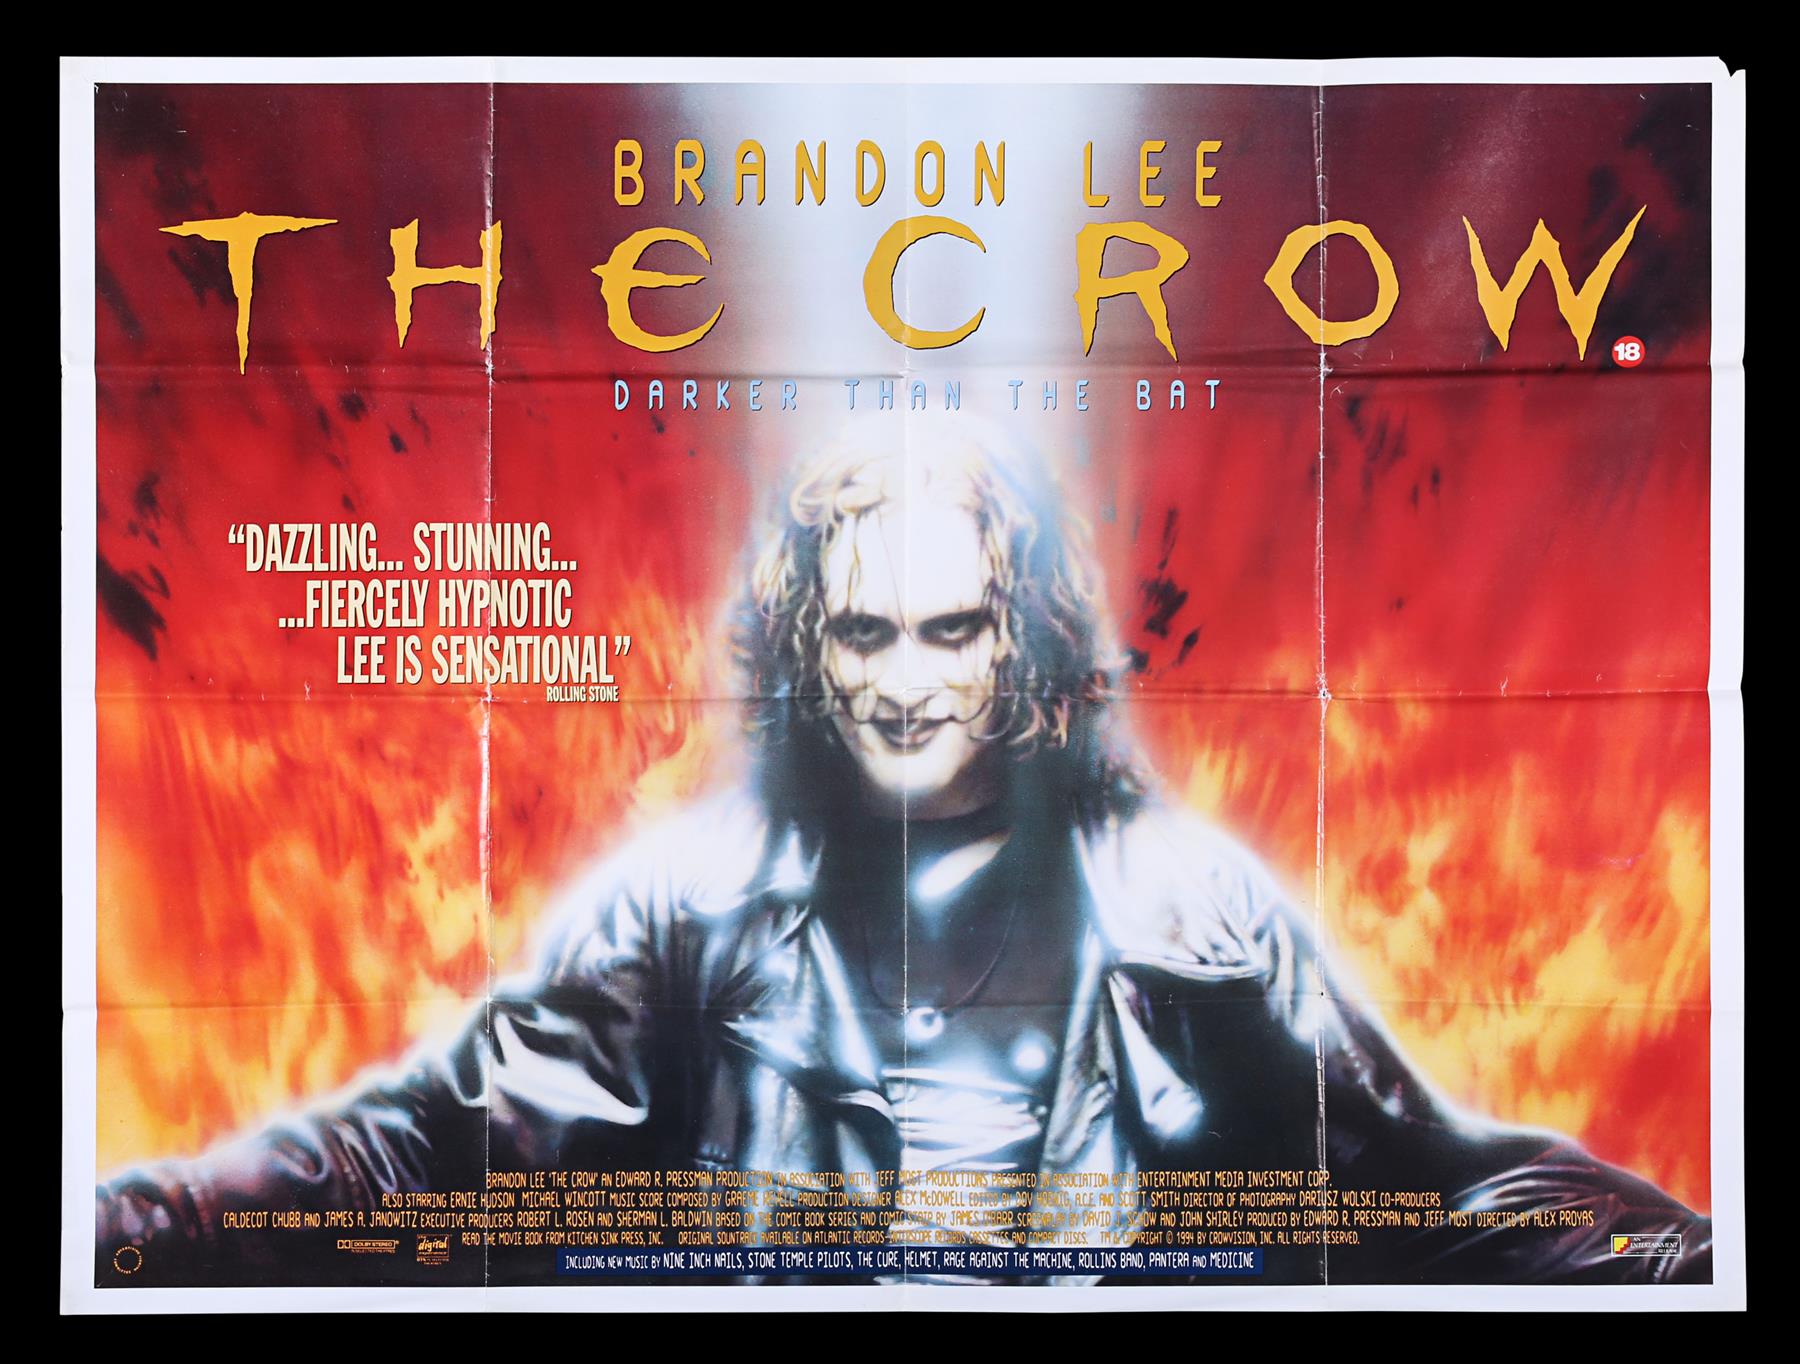 THE CROW (1994) - US One-Sheet and UK Quad, 1994 - Image 5 of 7